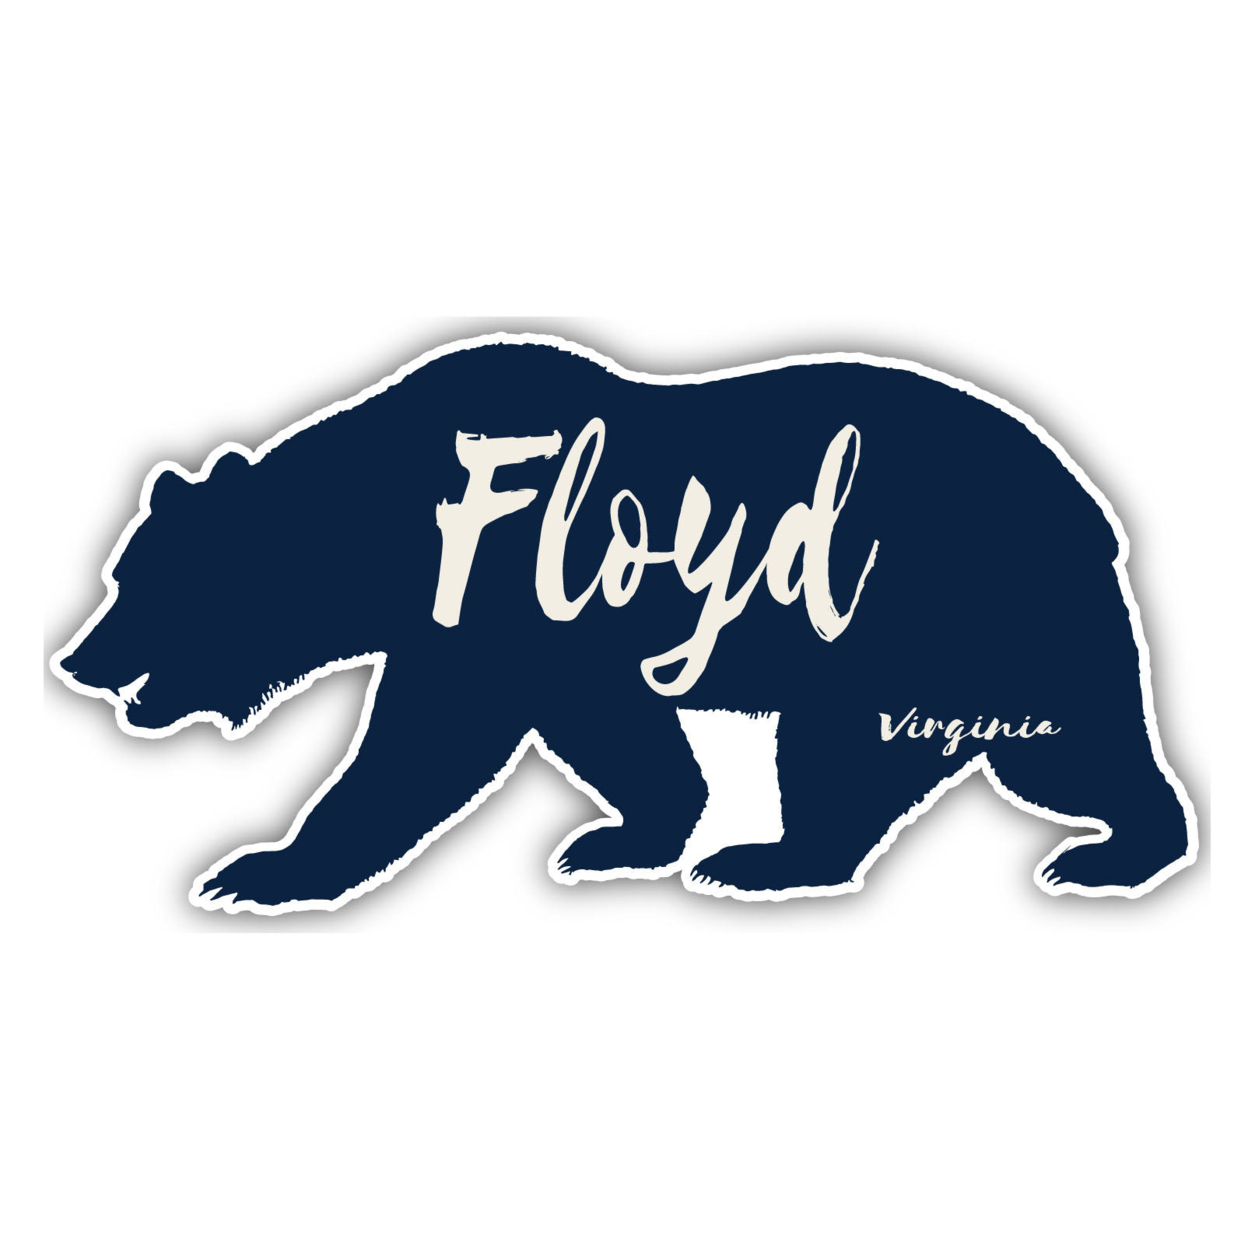 Floyd Virginia Souvenir Decorative Stickers (Choose Theme And Size) - 4-Pack, 2-Inch, Bear